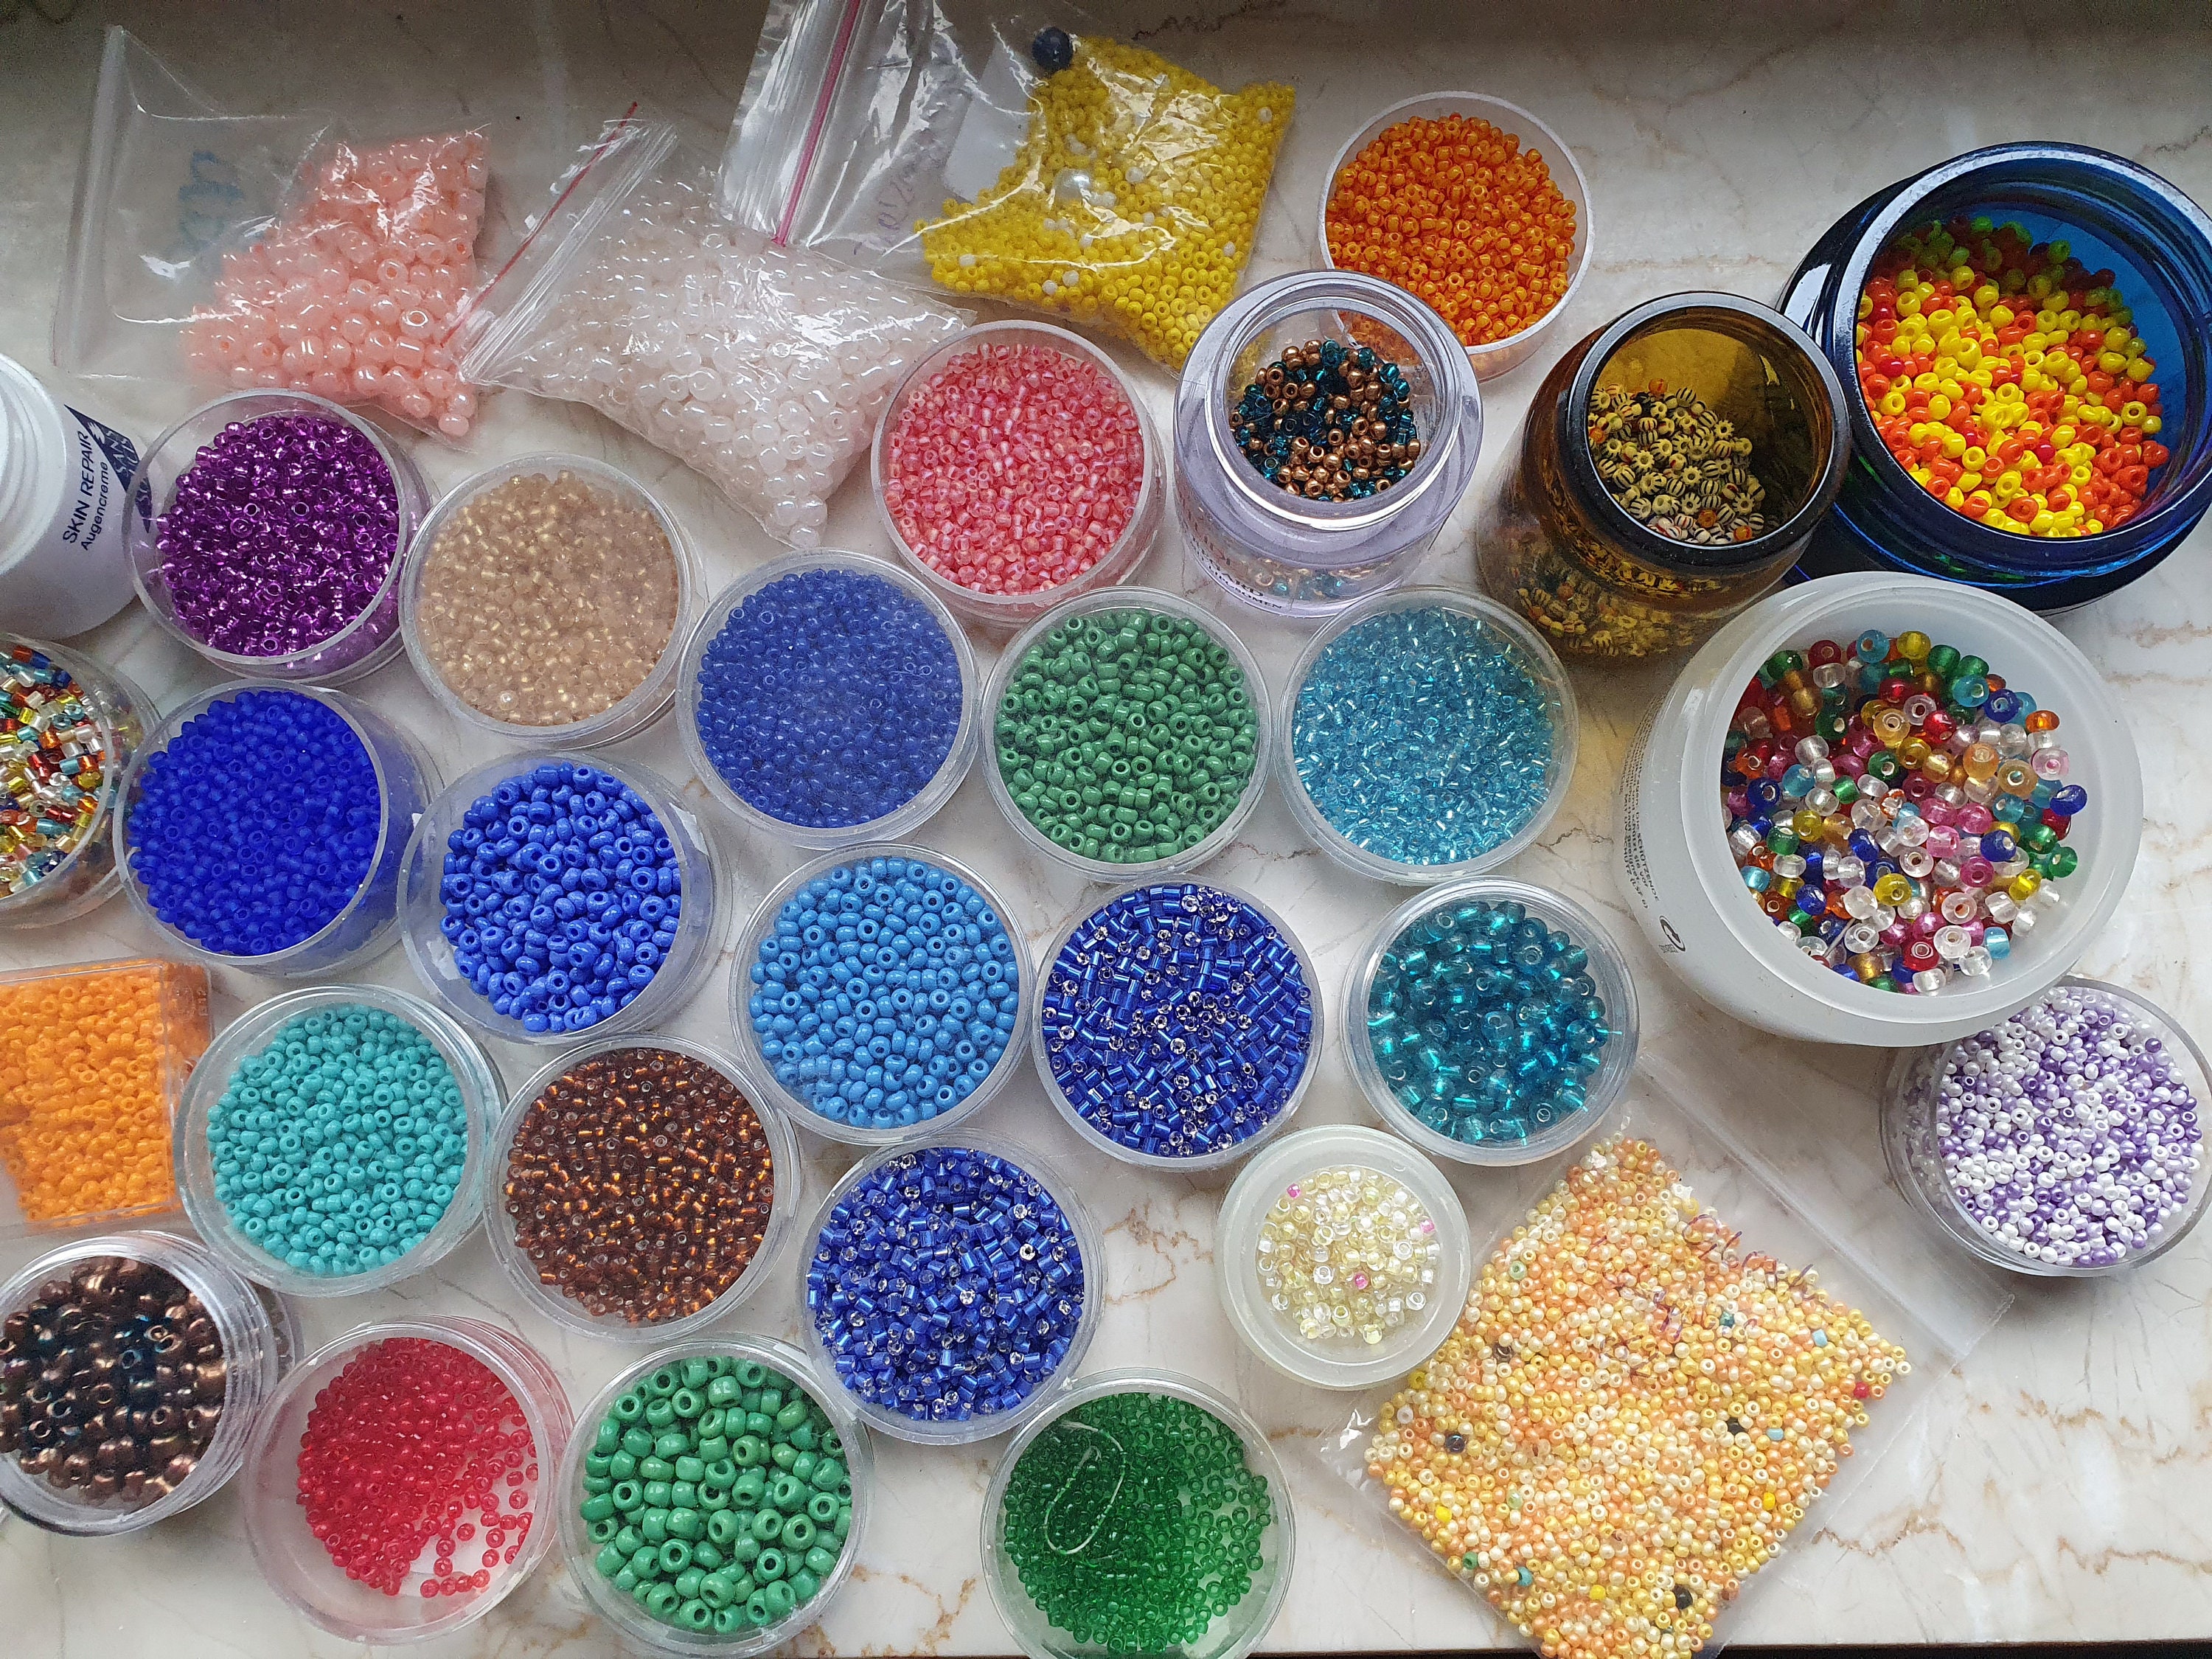 4mm Mix Seed Beads 40g , Rainbow Glass Seed Beads Mix Color Rocailles, DIY  Jewelry Making, Craft Supplies 